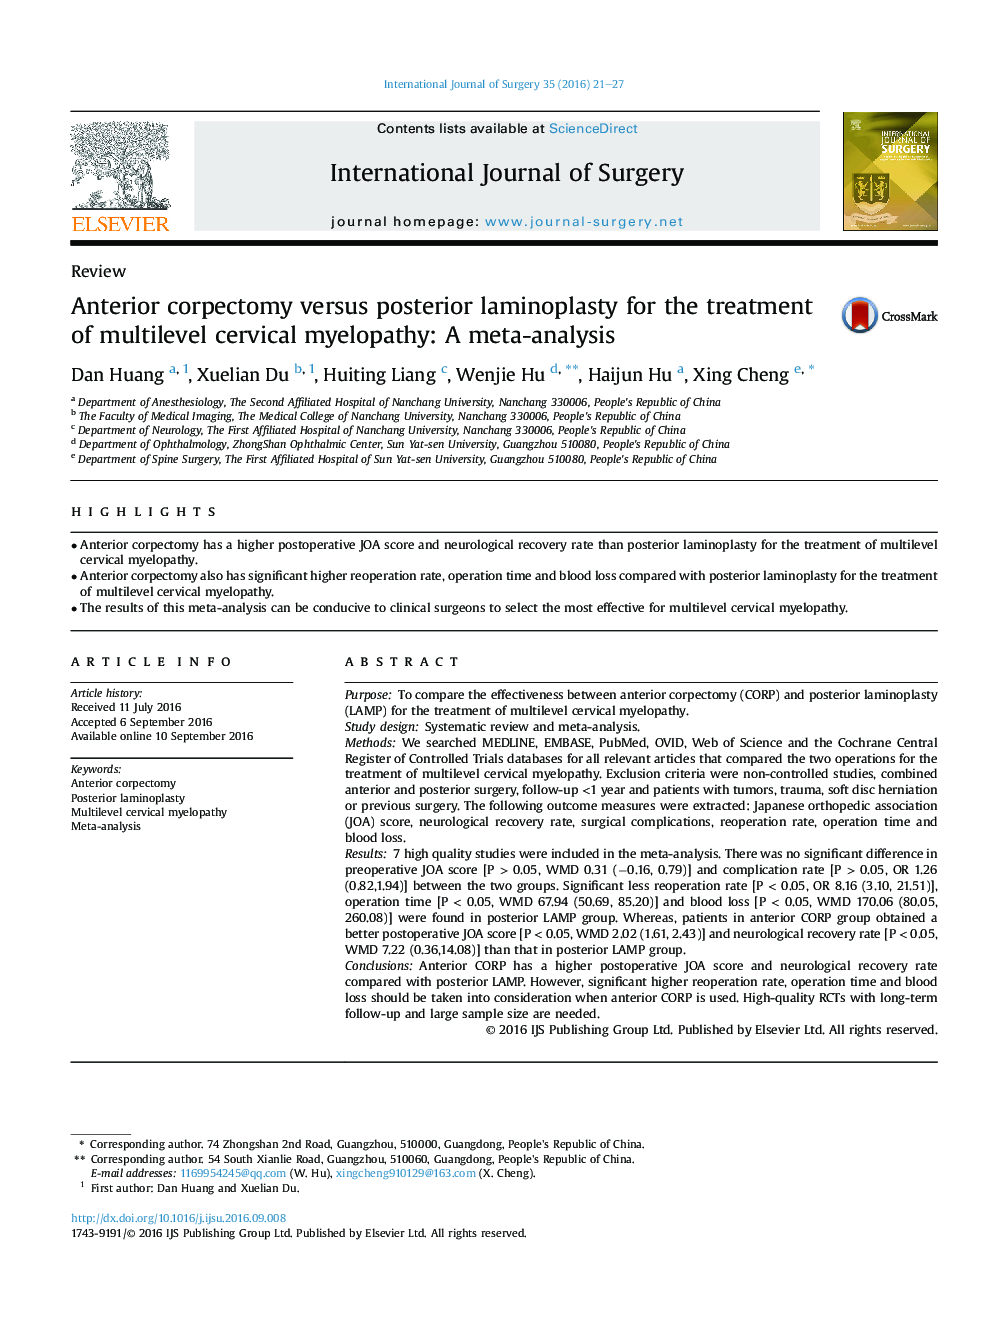 Anterior corpectomy versus posterior laminoplasty for the treatment of multilevel cervical myelopathy: A meta-analysis